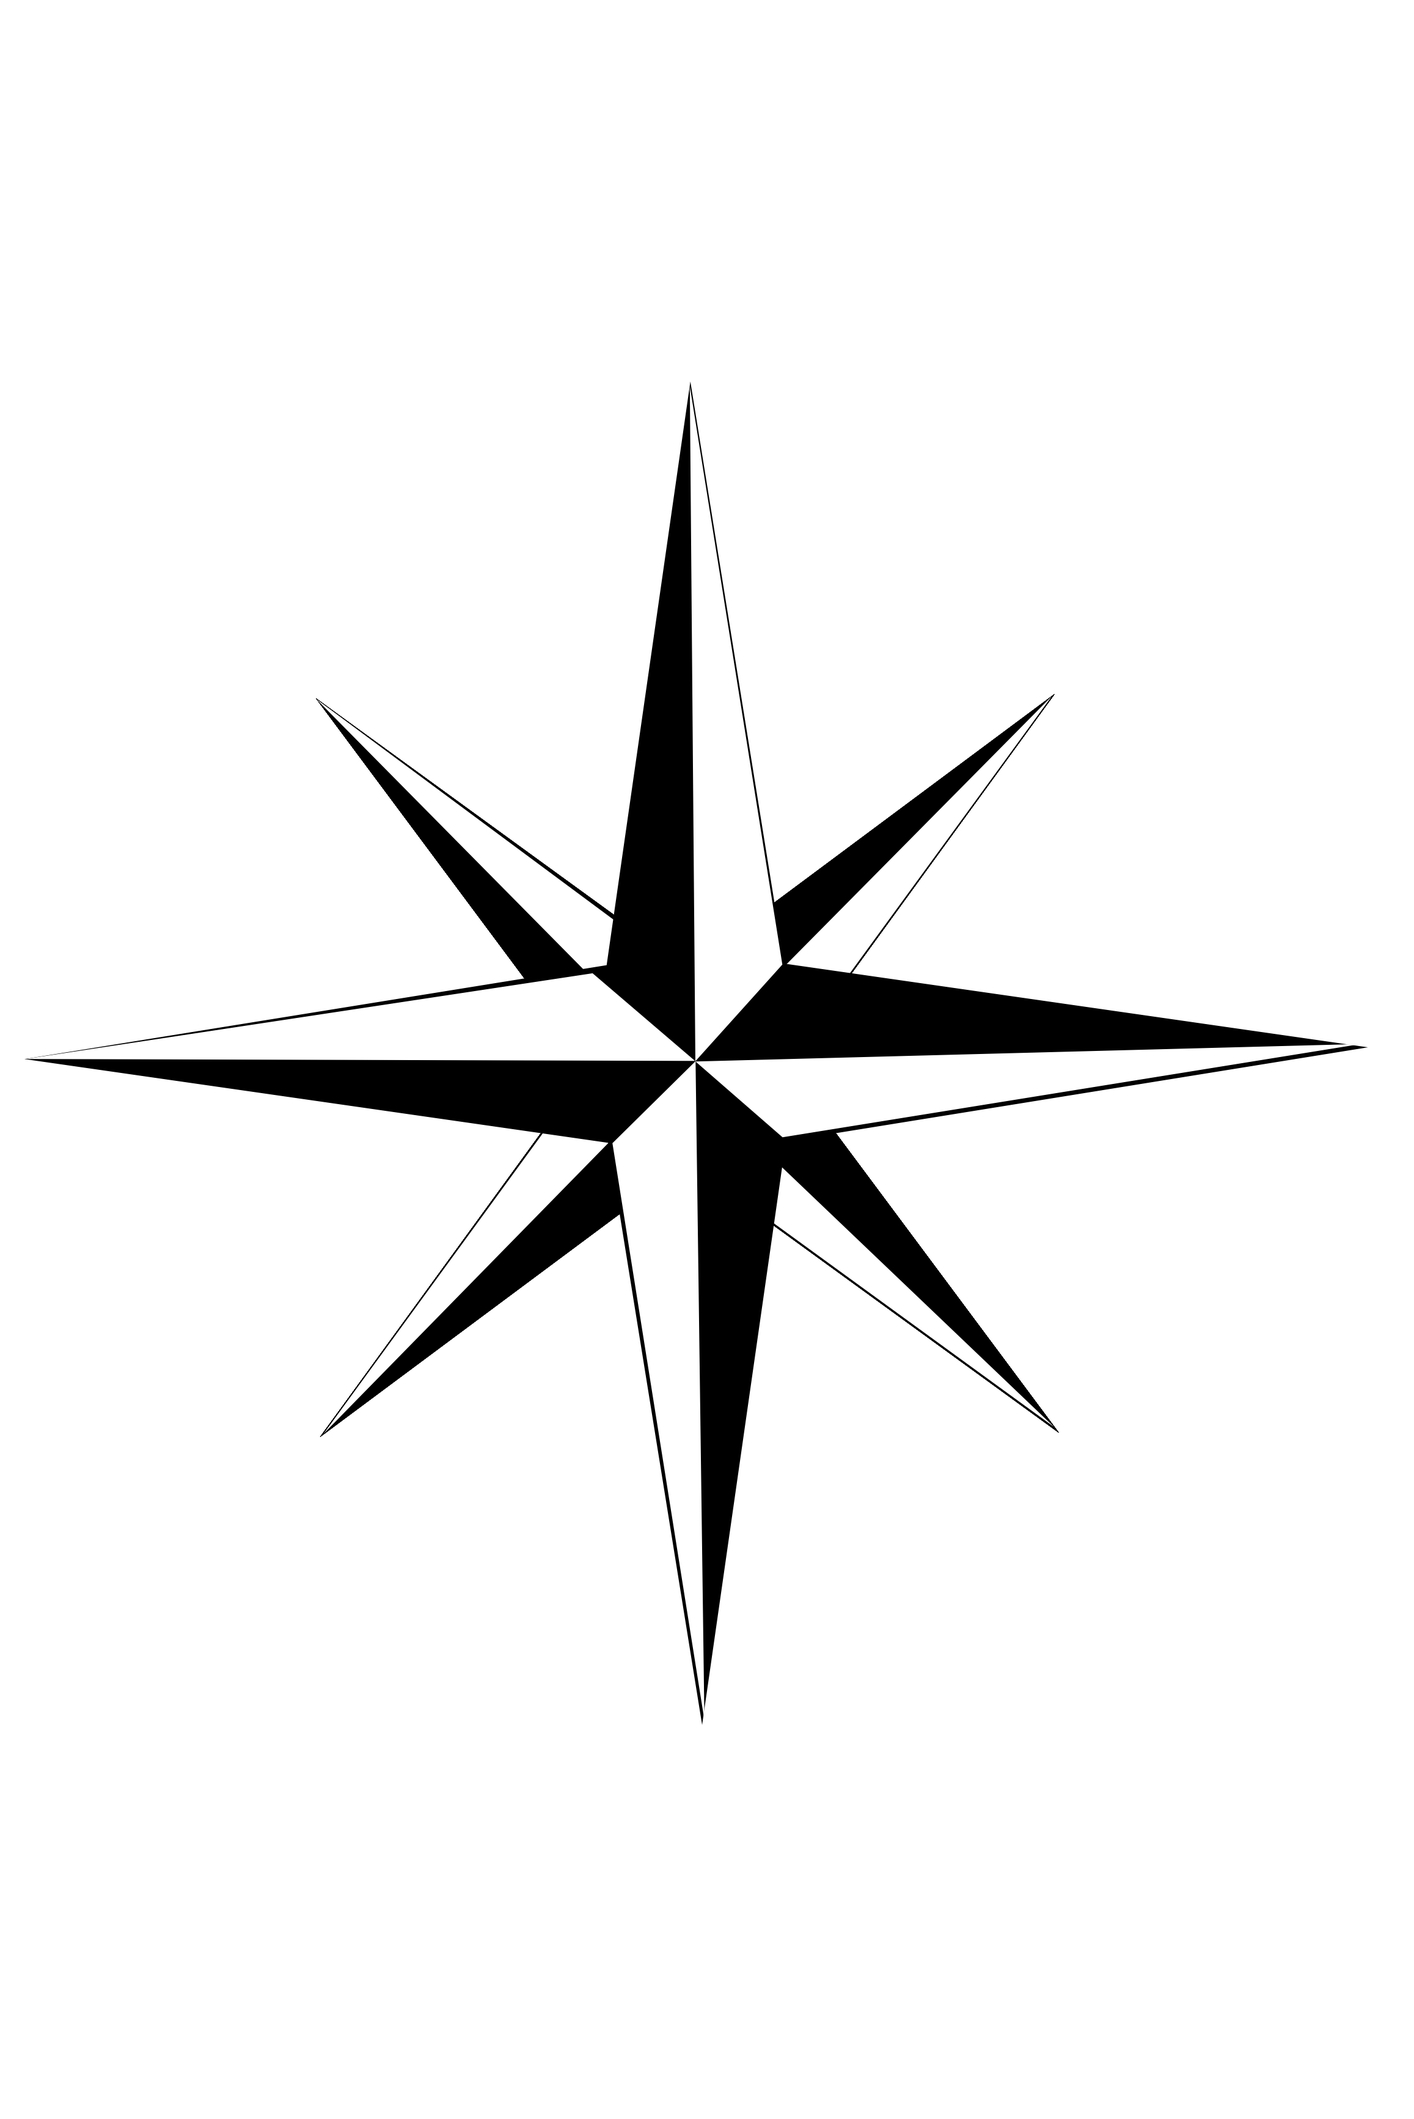 Compass rose tattoo designs | Tattoo Collection